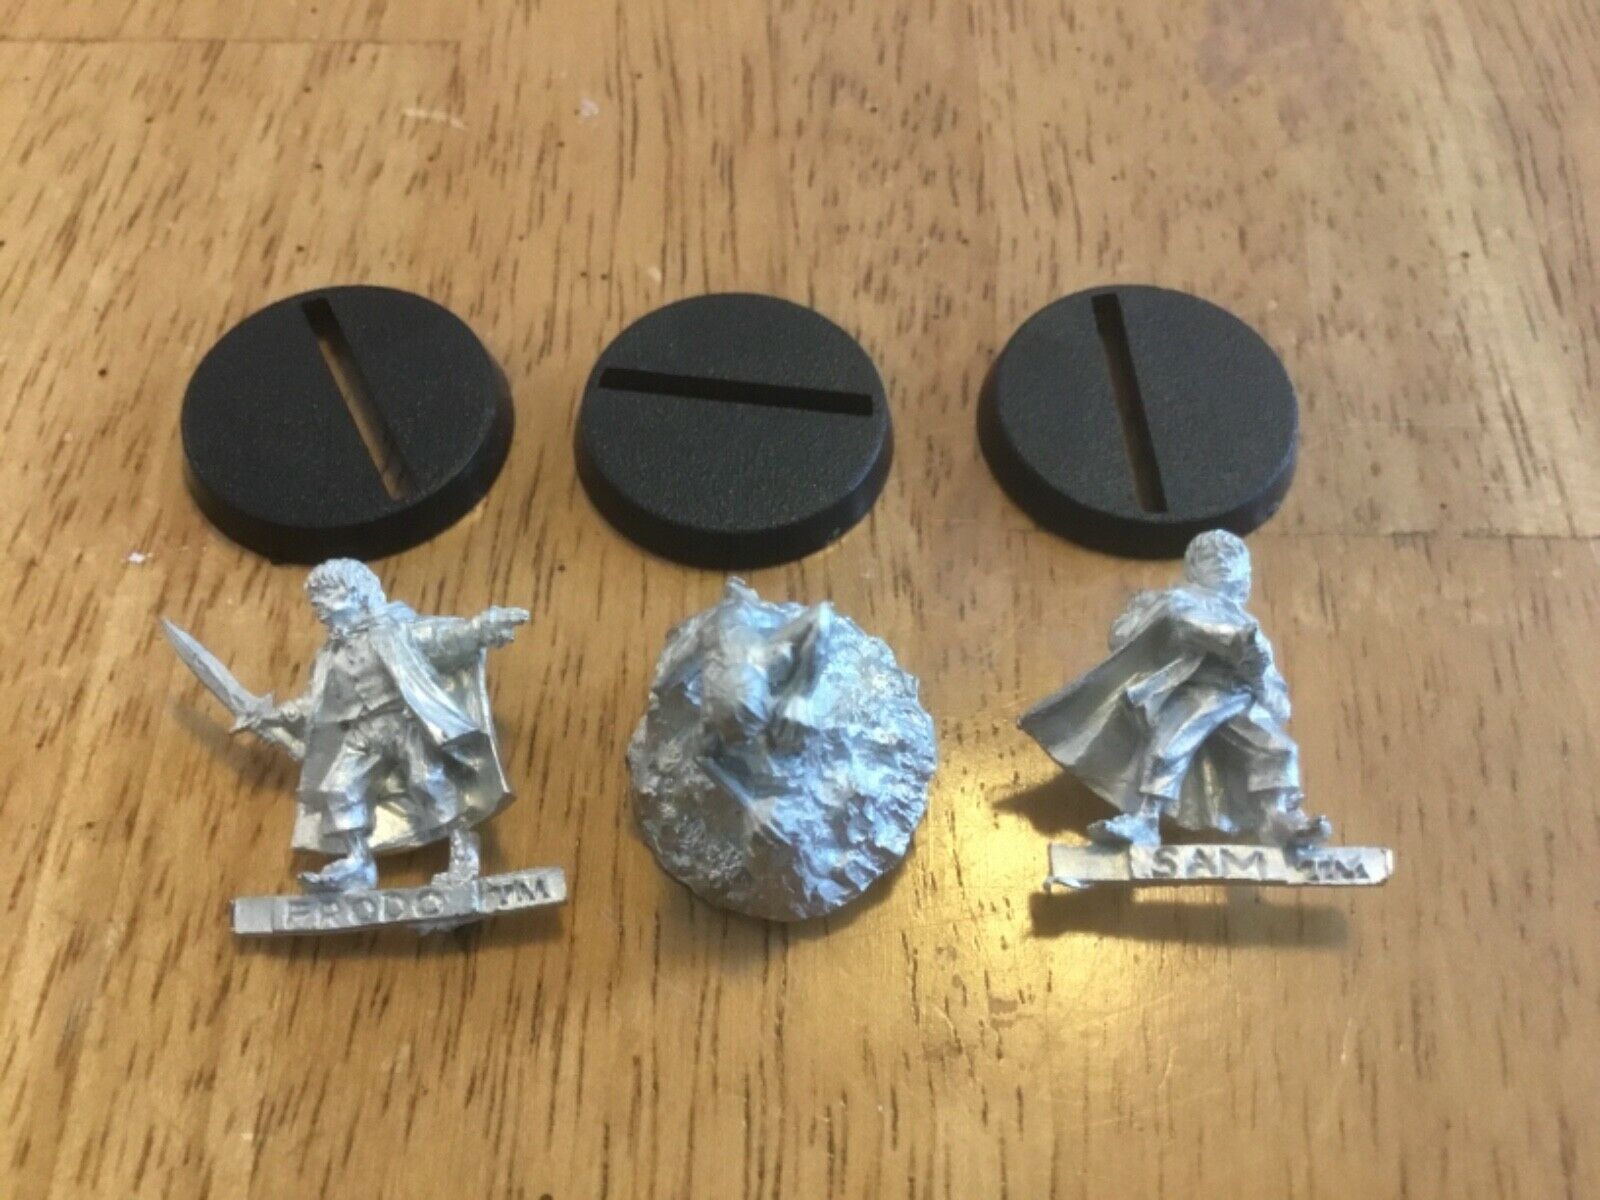 Frodo, Sam And Gollum On Small Rock Gw Lord Of The Rings Miniatures